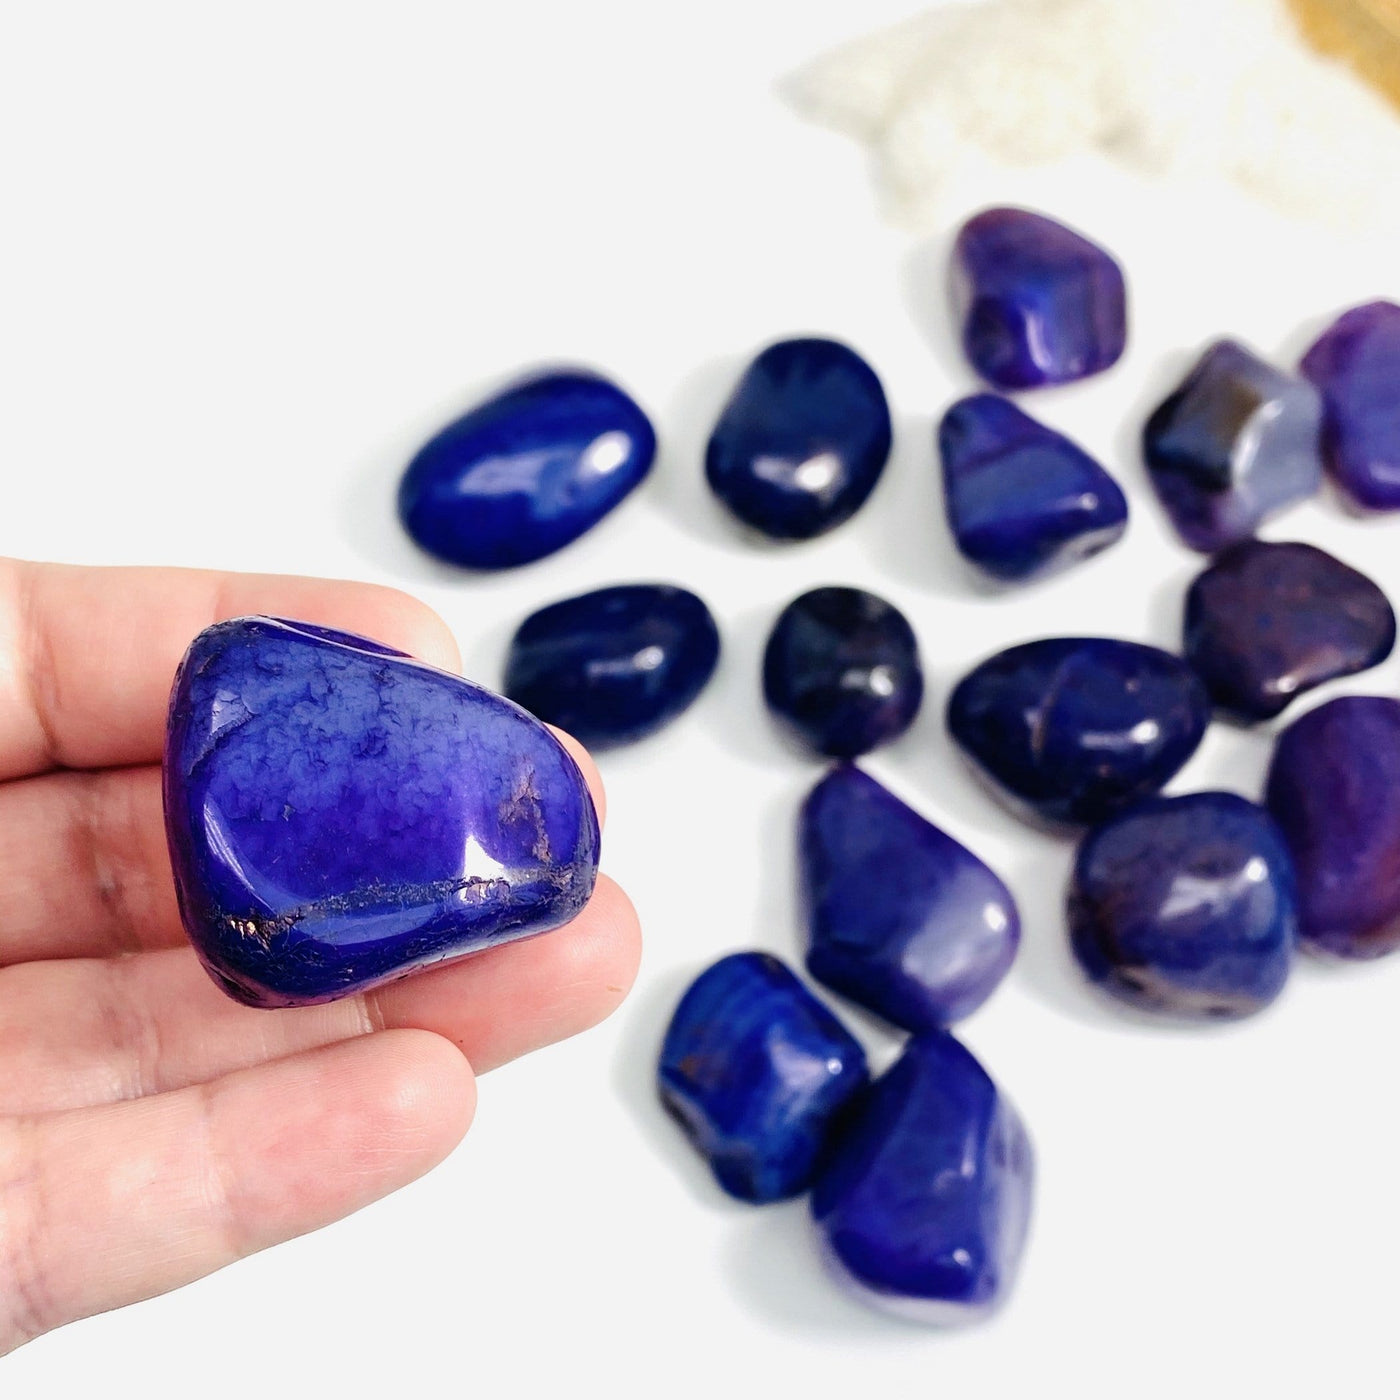 Single Purple Dyed Agate Tumbled Gemstones on hand for size comparison